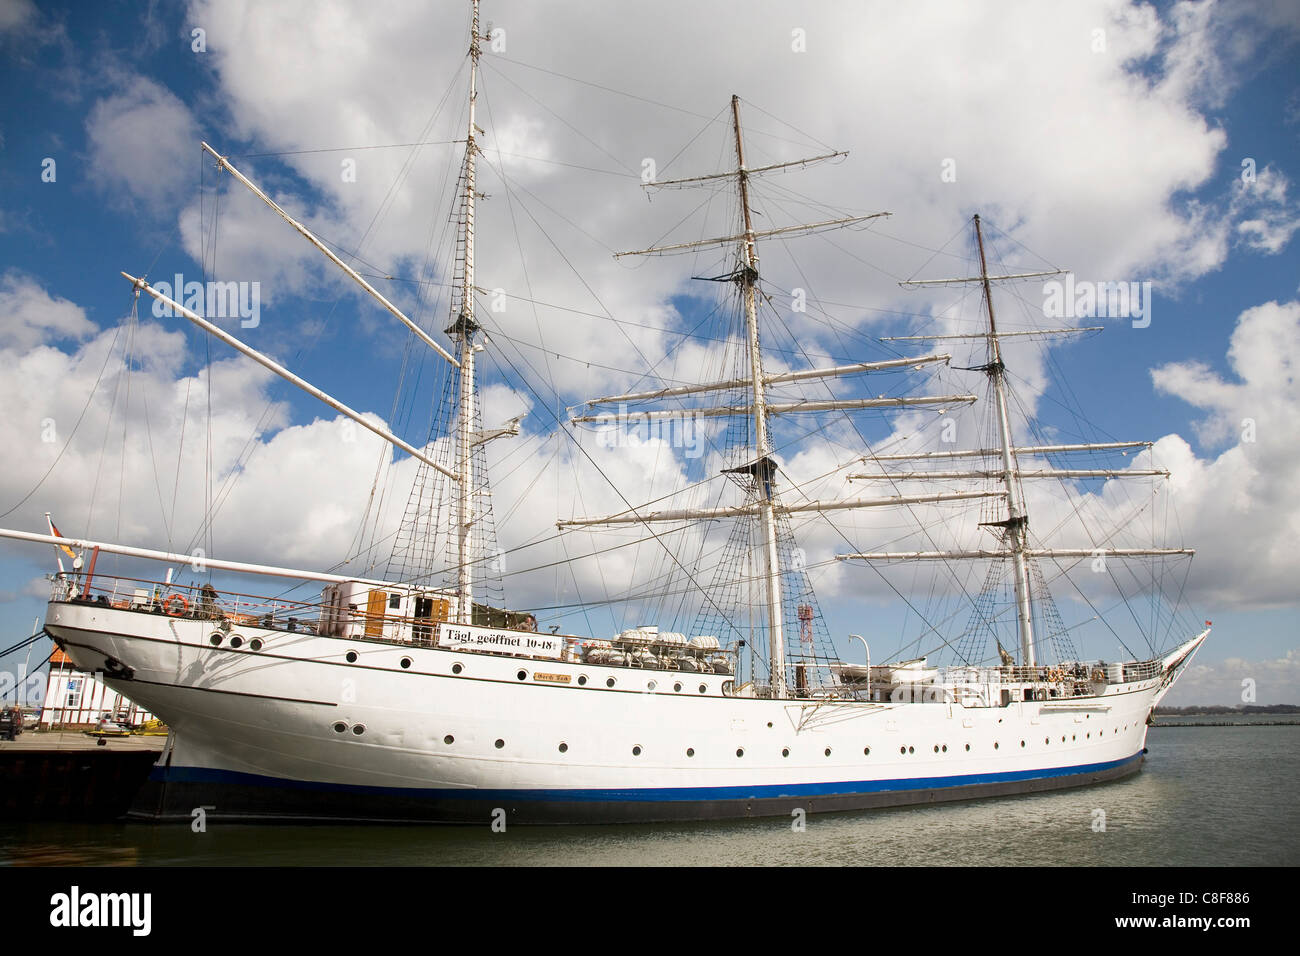 The Gorch Fock I museum ship in the harbour of Stralsund, Mecklenburg-Vorpommern, Germany Stock Photo